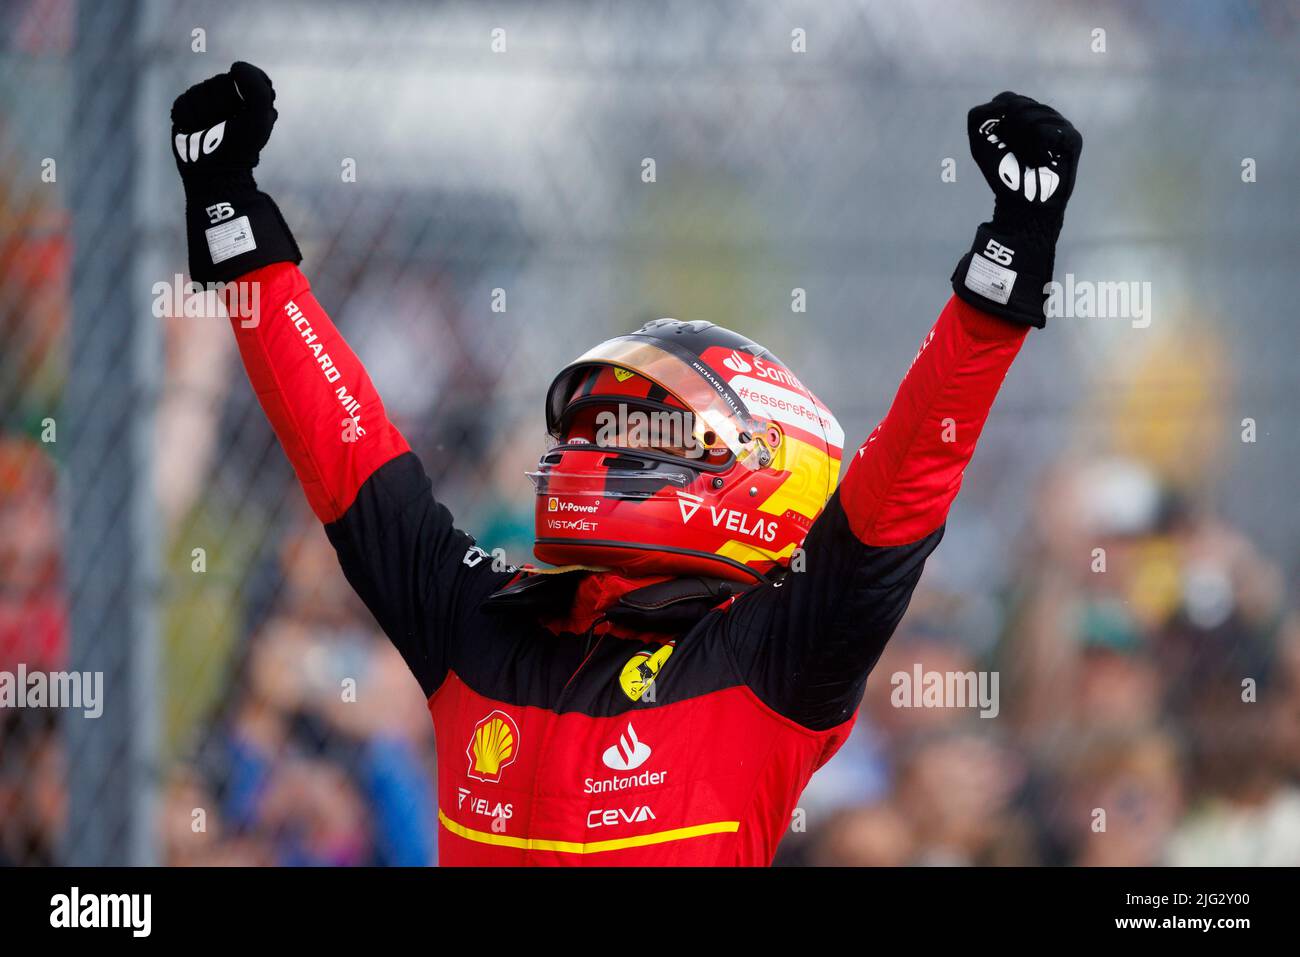 Carlos Sainz celebrates winning his first ever F1 Grand Prix standing on top of his car in Parc ferme at the F1 British Grand Prix. Carlos Sainz wins Stock Photo